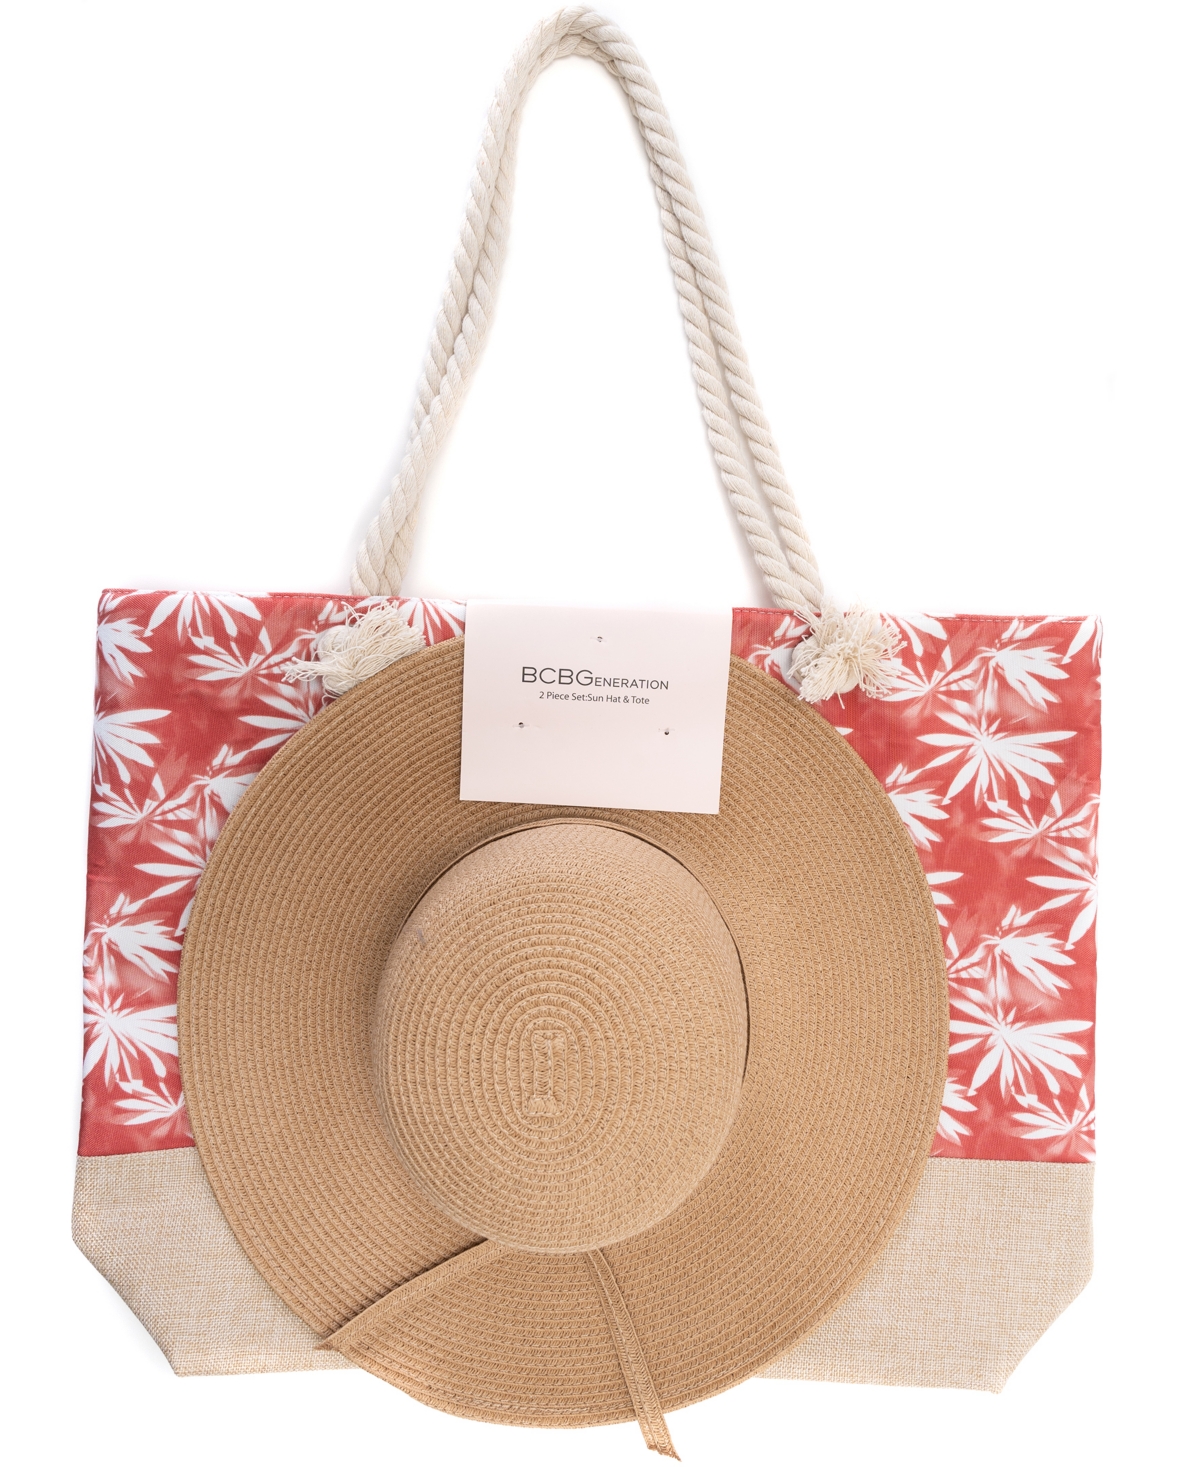 Bcbgeneration Printed Tote Bag And Floppy Hat Set In Coral